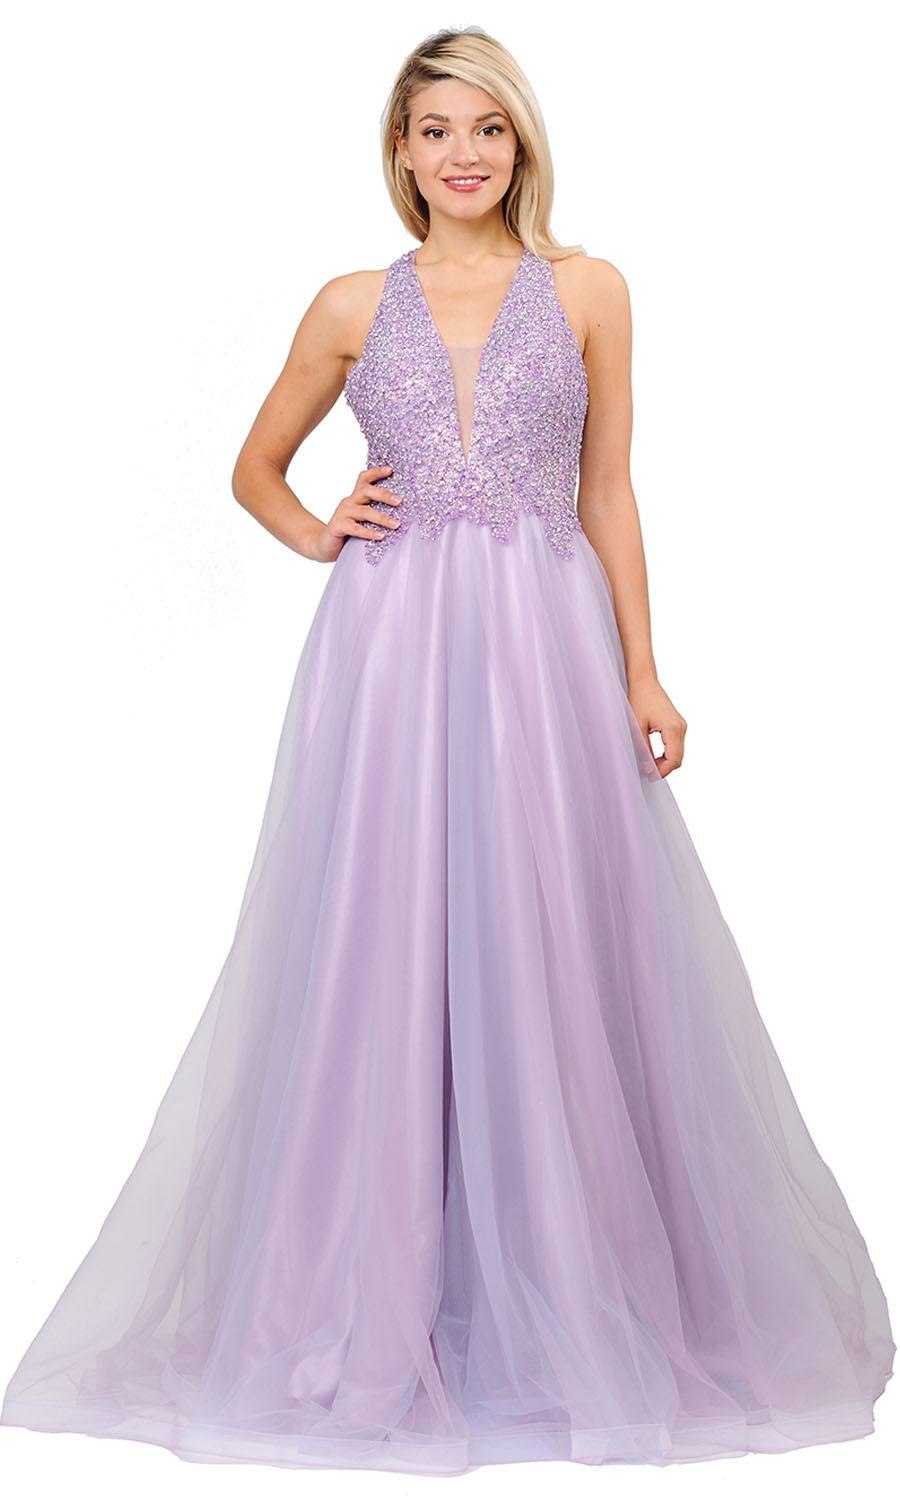 Beaded Long Prom Dress with Strappy Open-Back Lavender